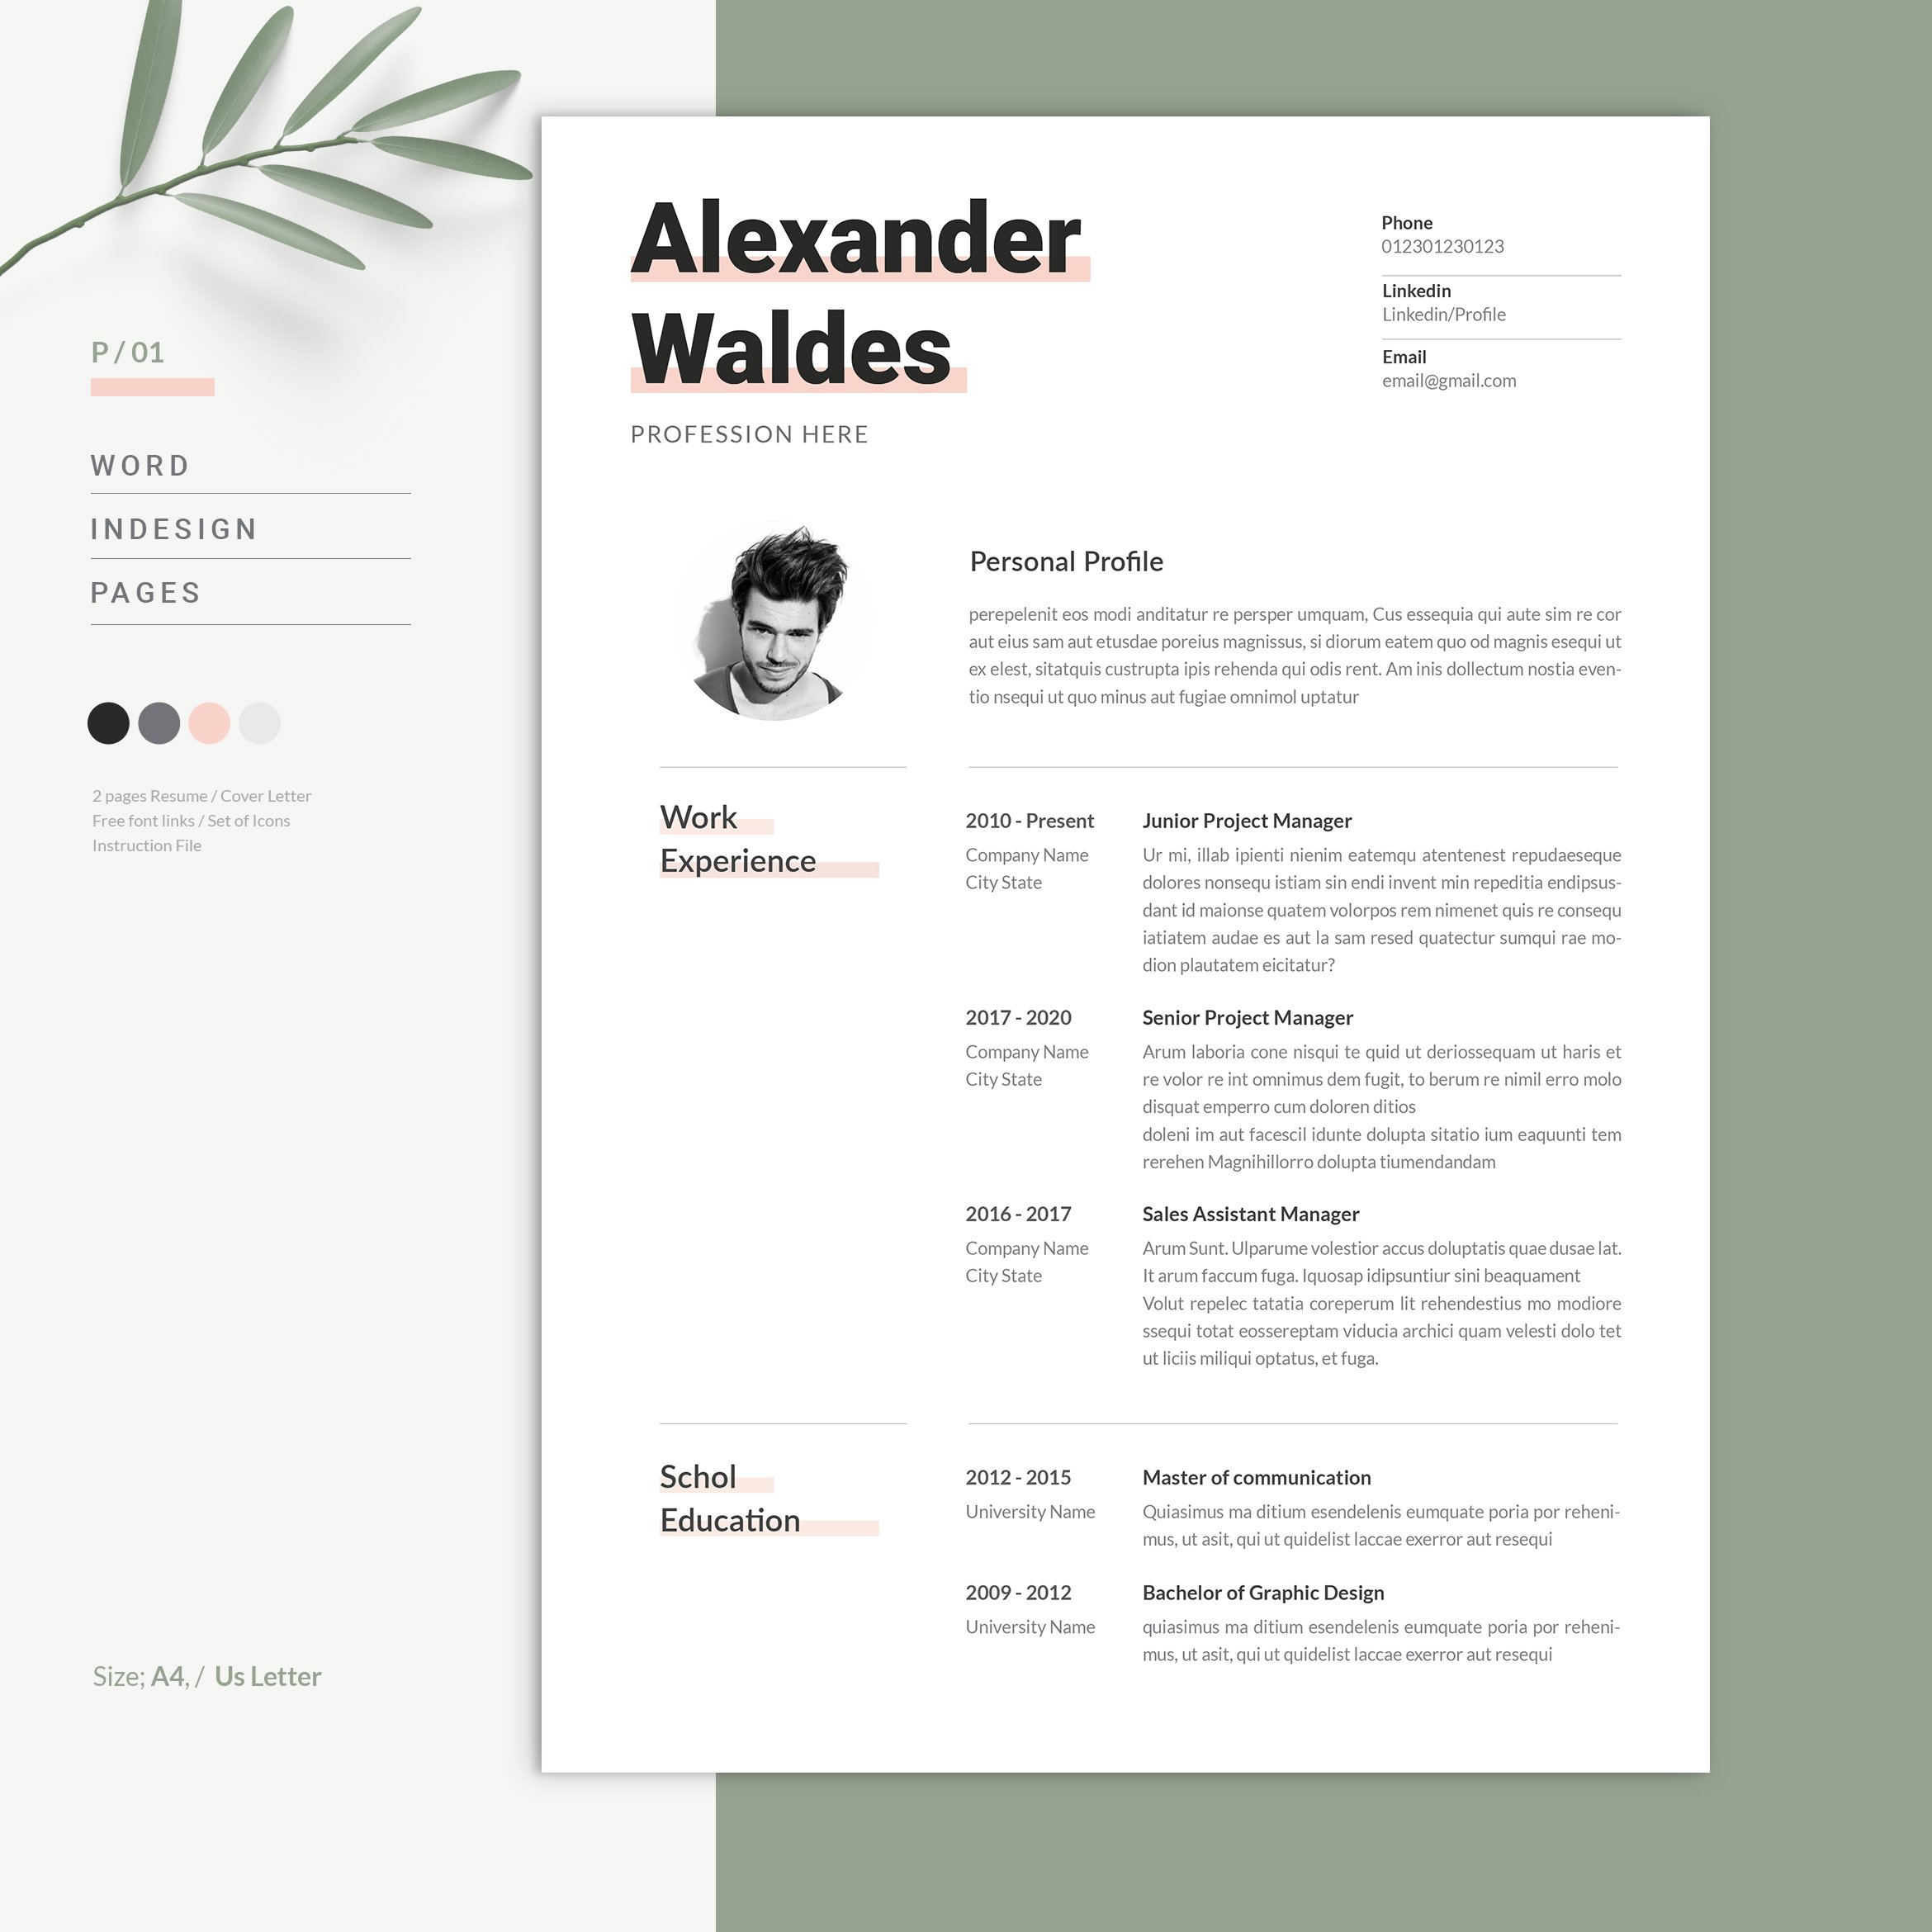 Creative Resume Template cover image.